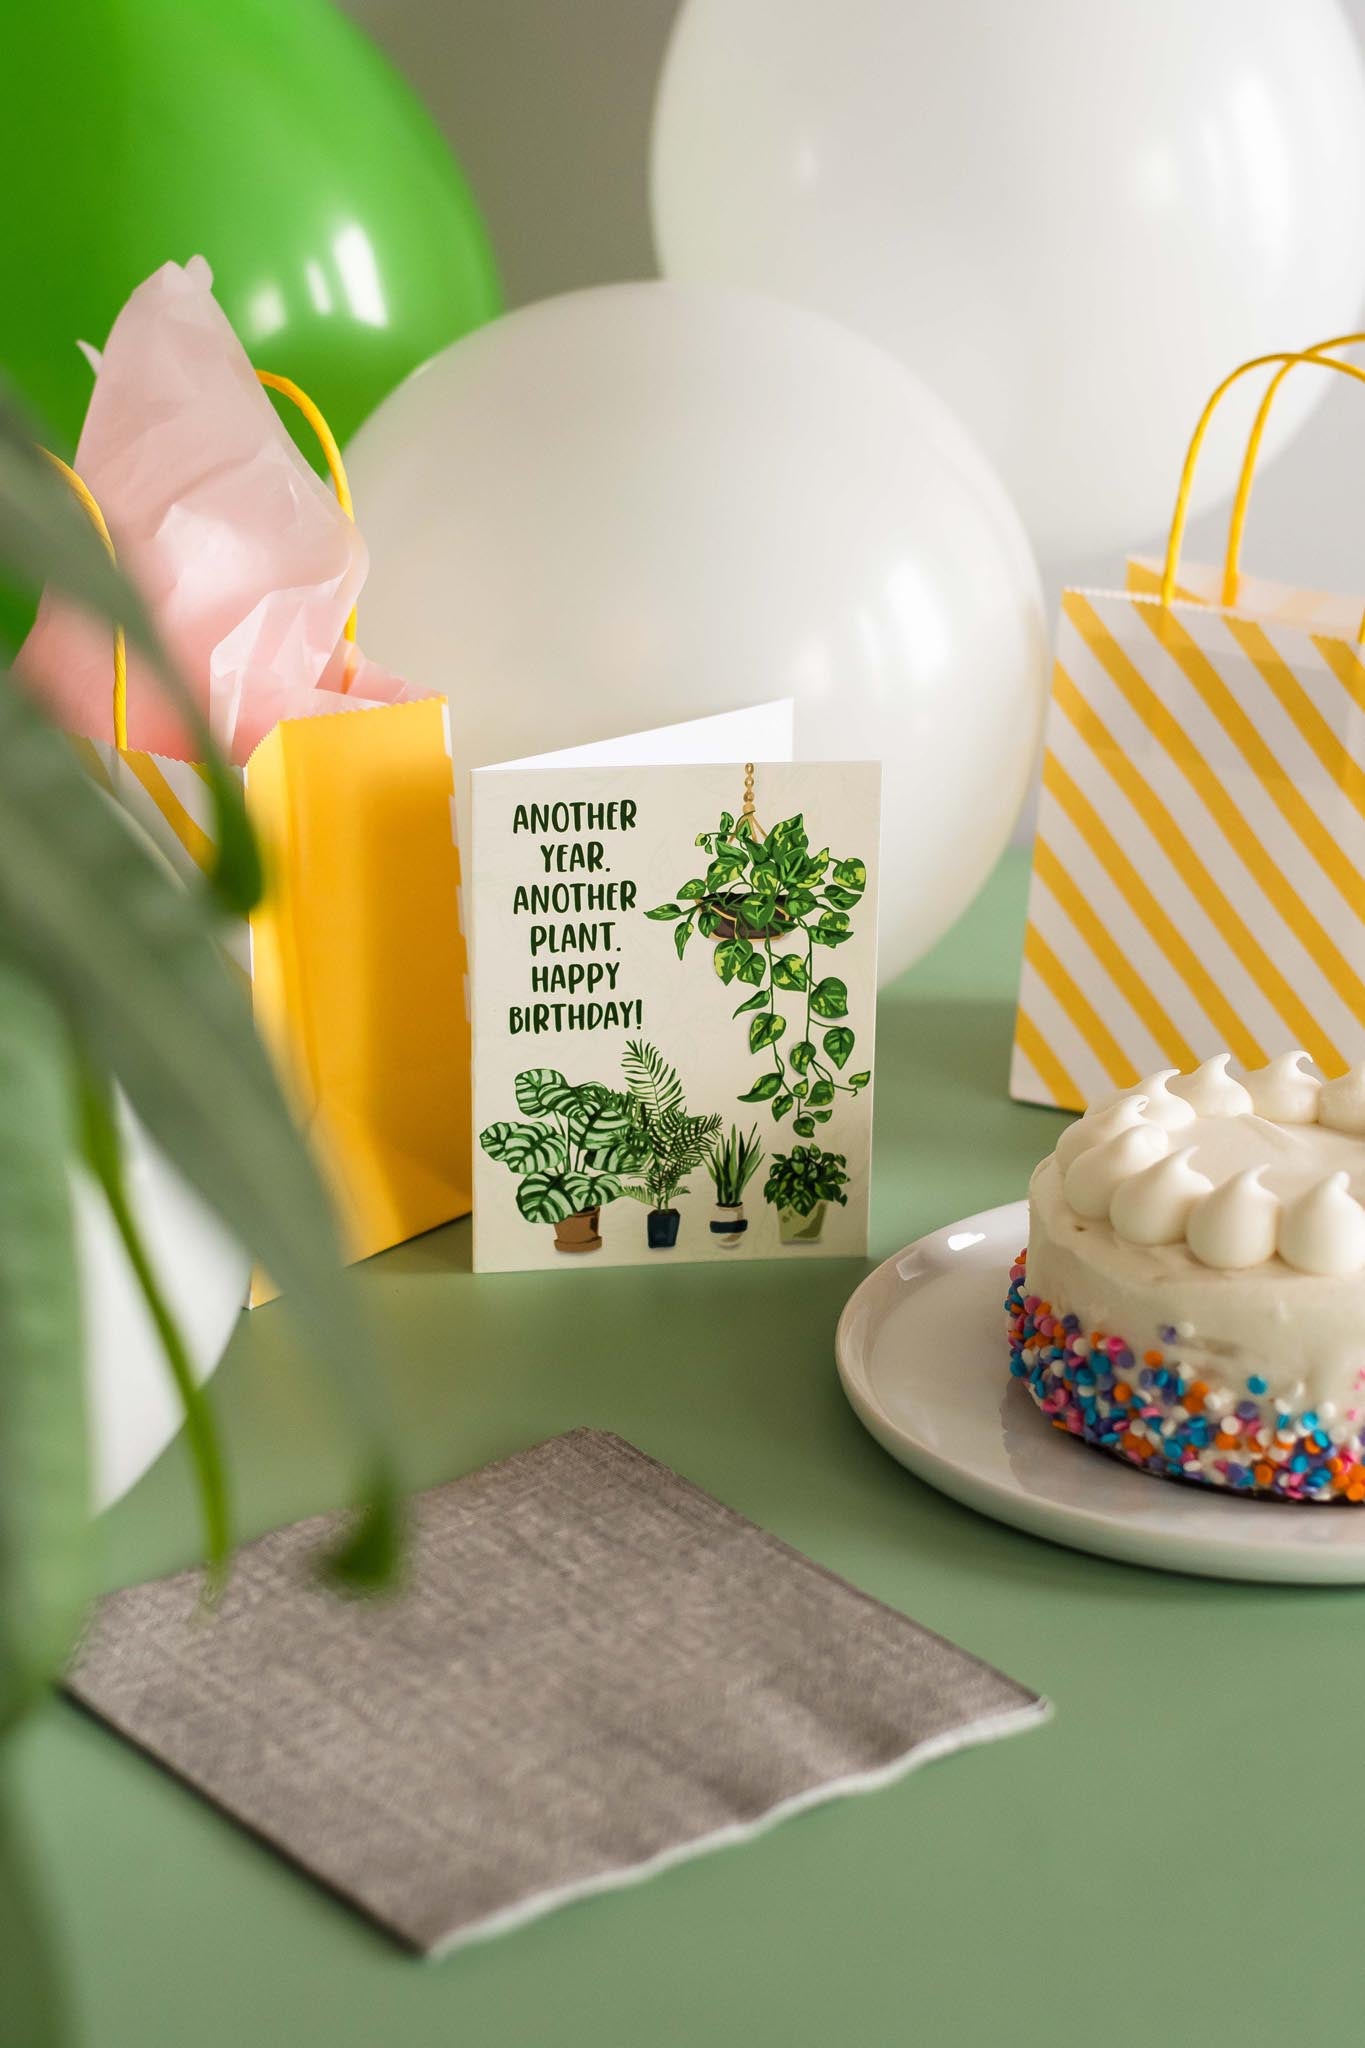 Another Year. Another Plant. Happy Birthday! - Greeting Card